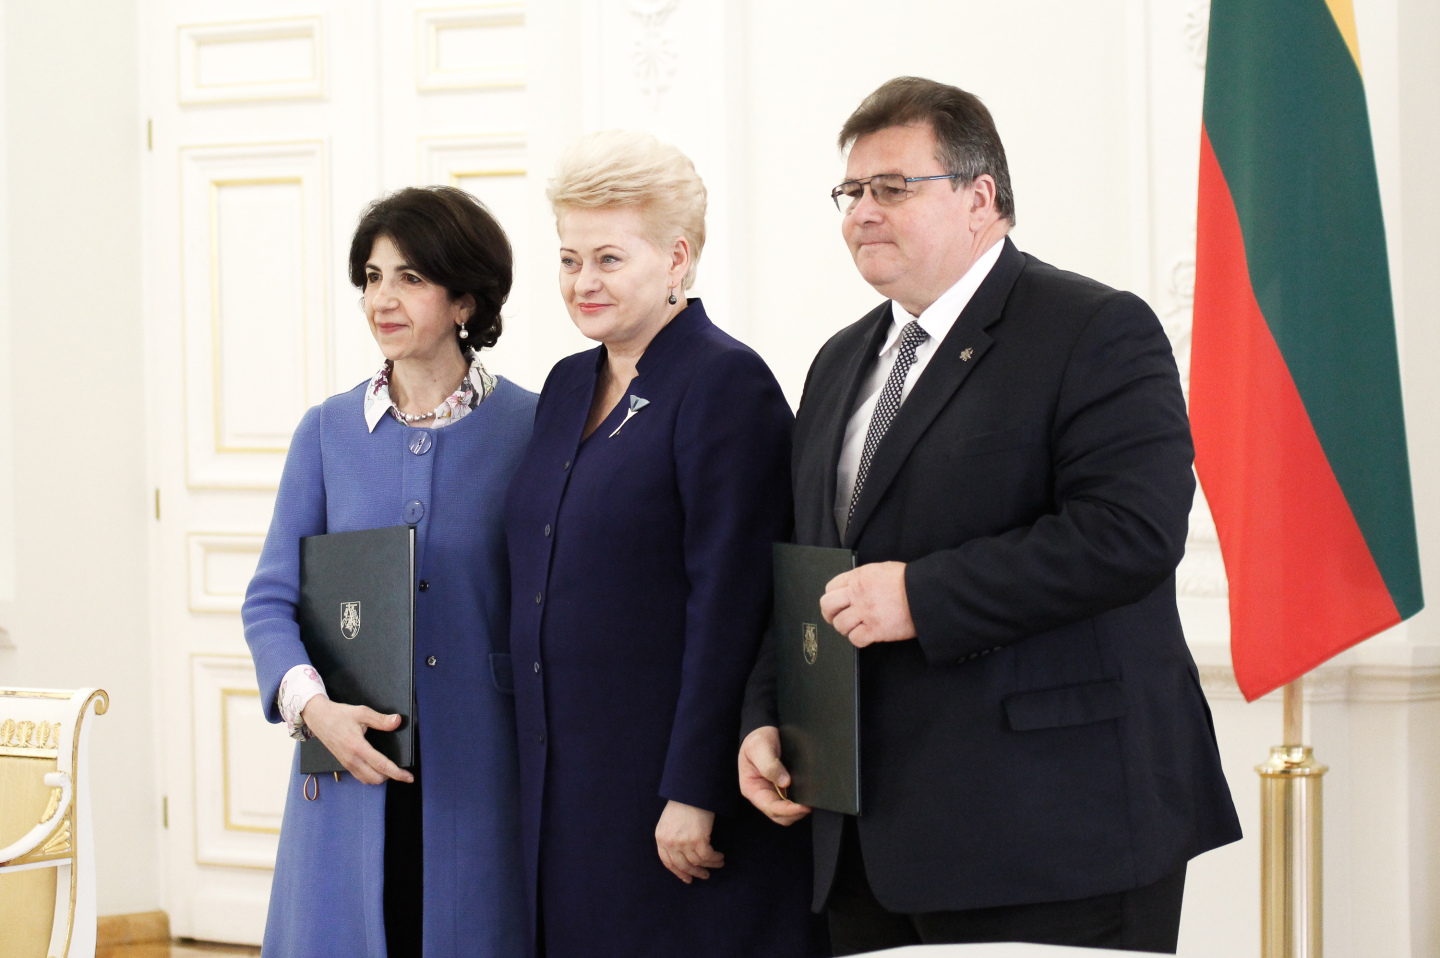 Lithuania becomes Associate Member State of CERN